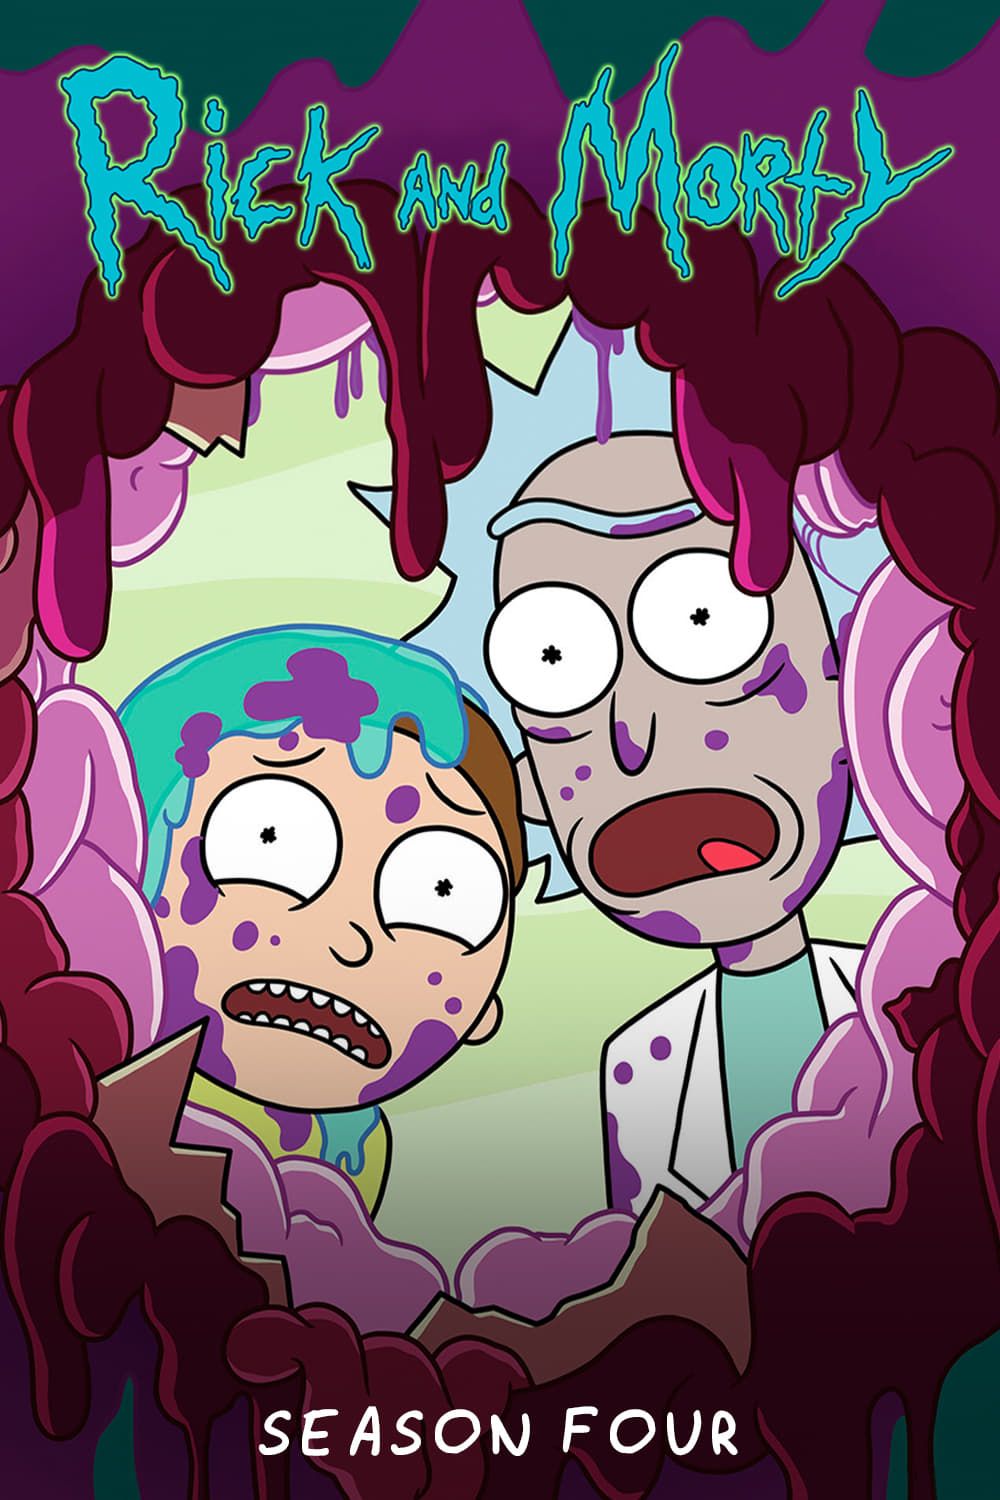 Rick and Morty season 4 streaming: How to watch online